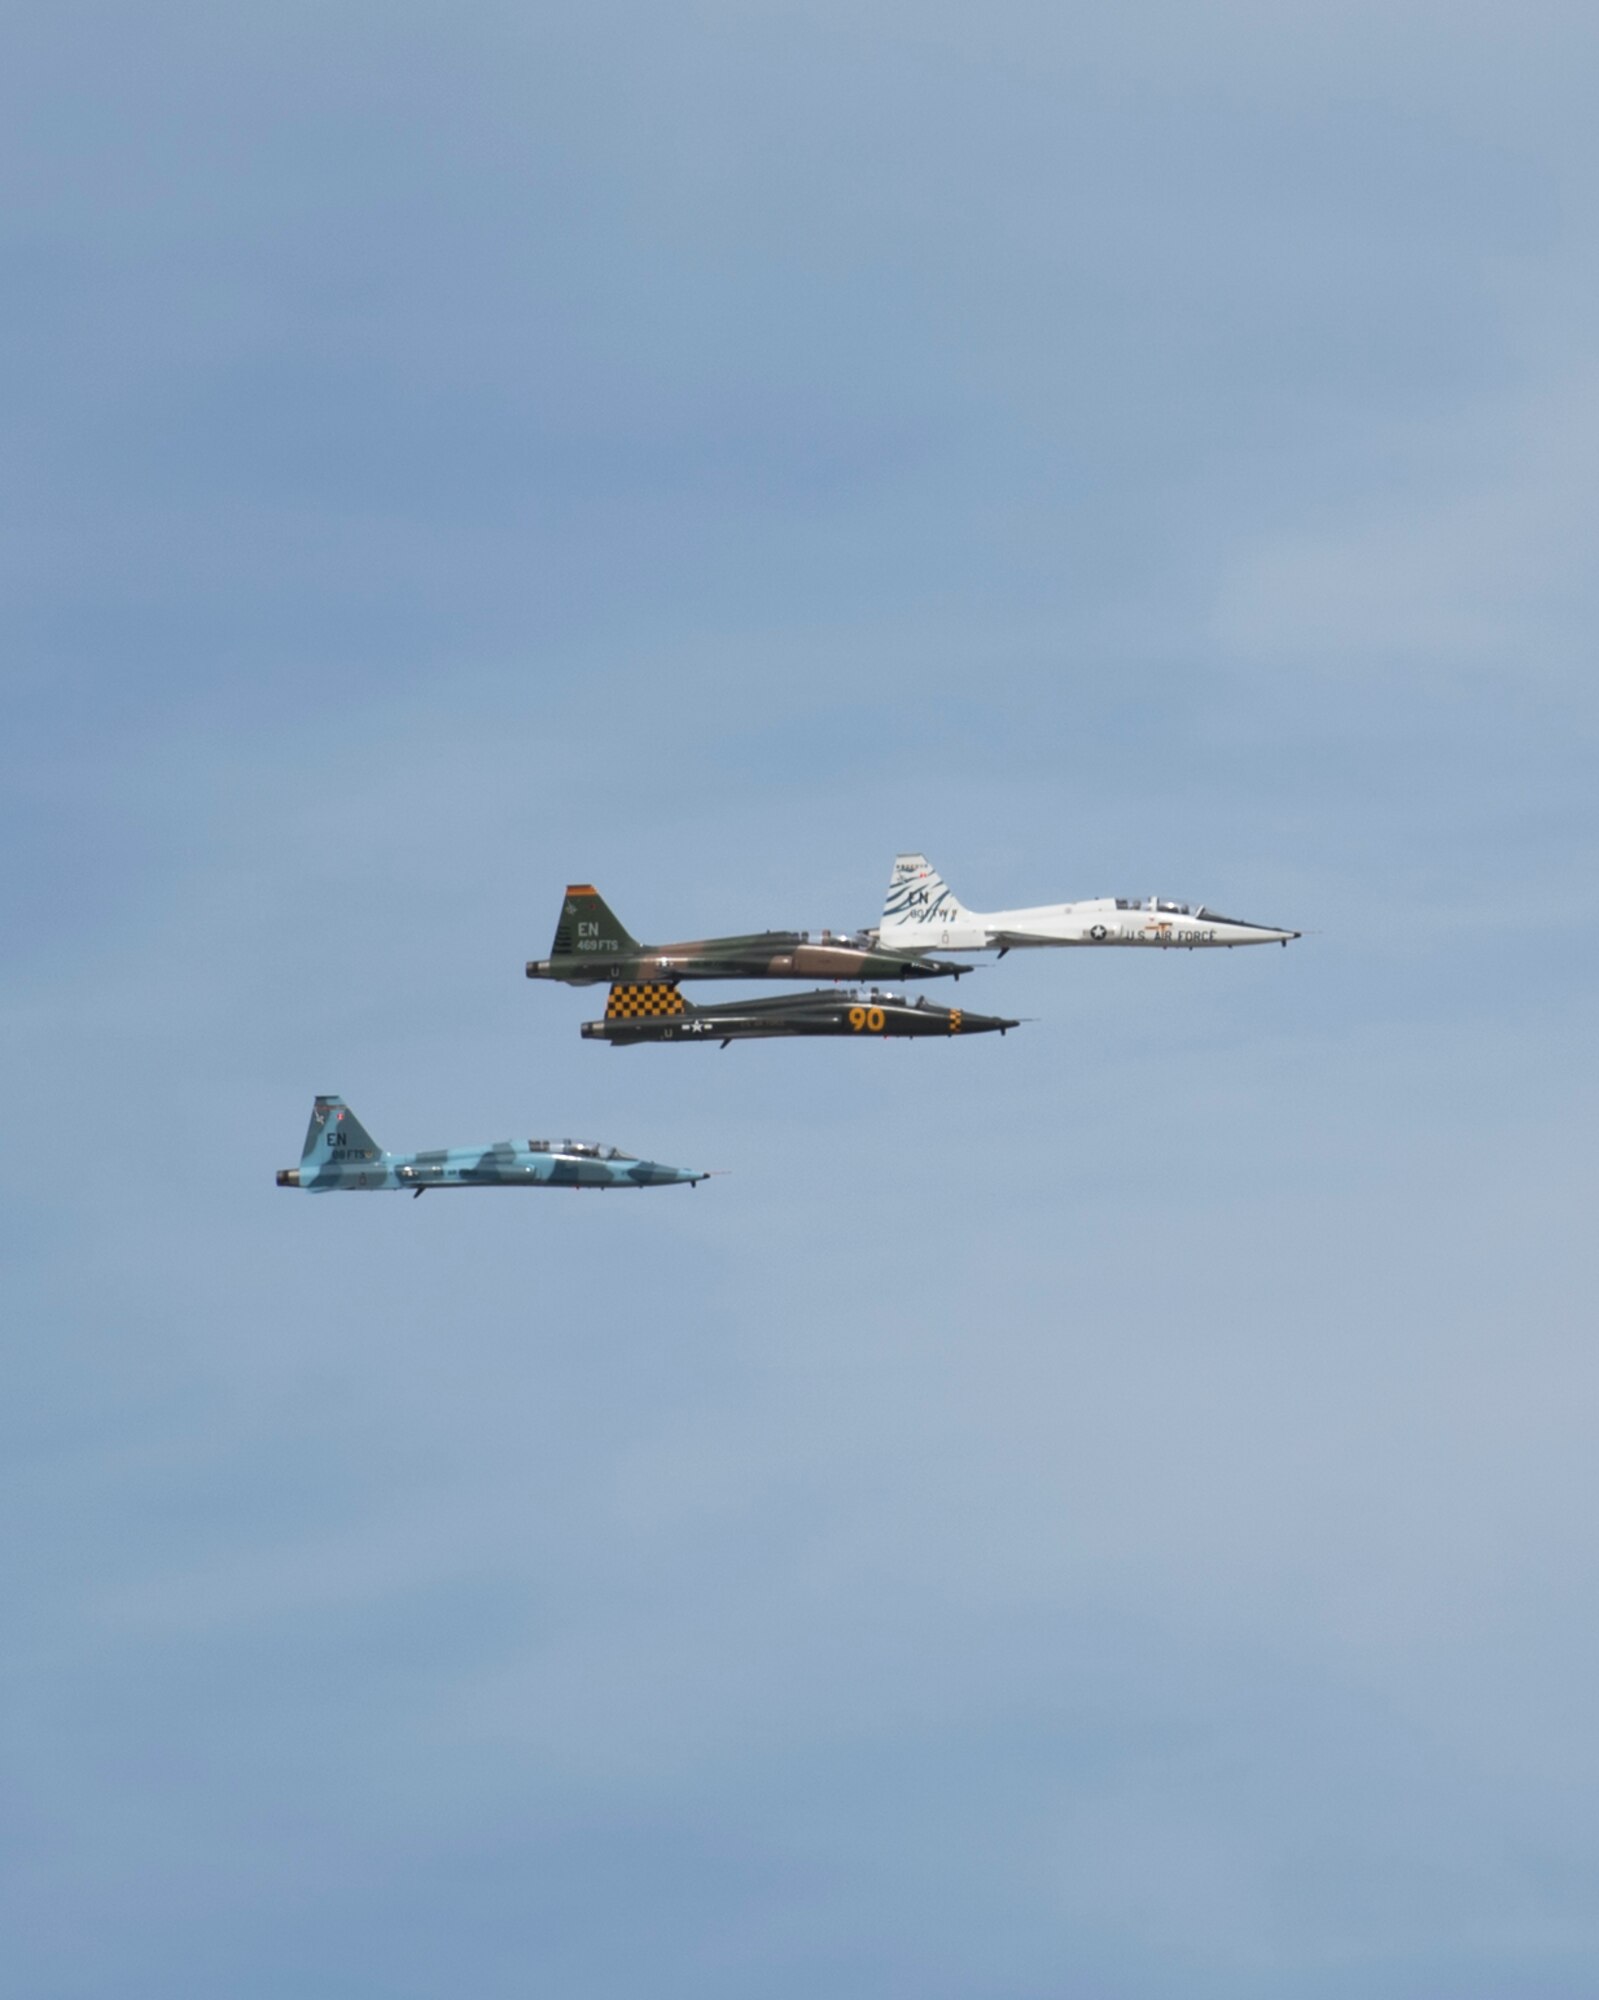 Four T-38 Talon aircraft participate in the Spirit of Texoma flyover on May 1, 2020. The flyover was a way for Sheppard Air Force Base, Texas, to show gratitude towards the COVID-19 frontline healthcare workers in the local community. The flyover consisted of a 4-ship T-38 Talon formation and a 4-ship T-6 Texan II formation, with a T-38 and T-6 chase plane behind them for photo and video. (U. S. Air Force photo by Senior Airman Pedro Tenorio)